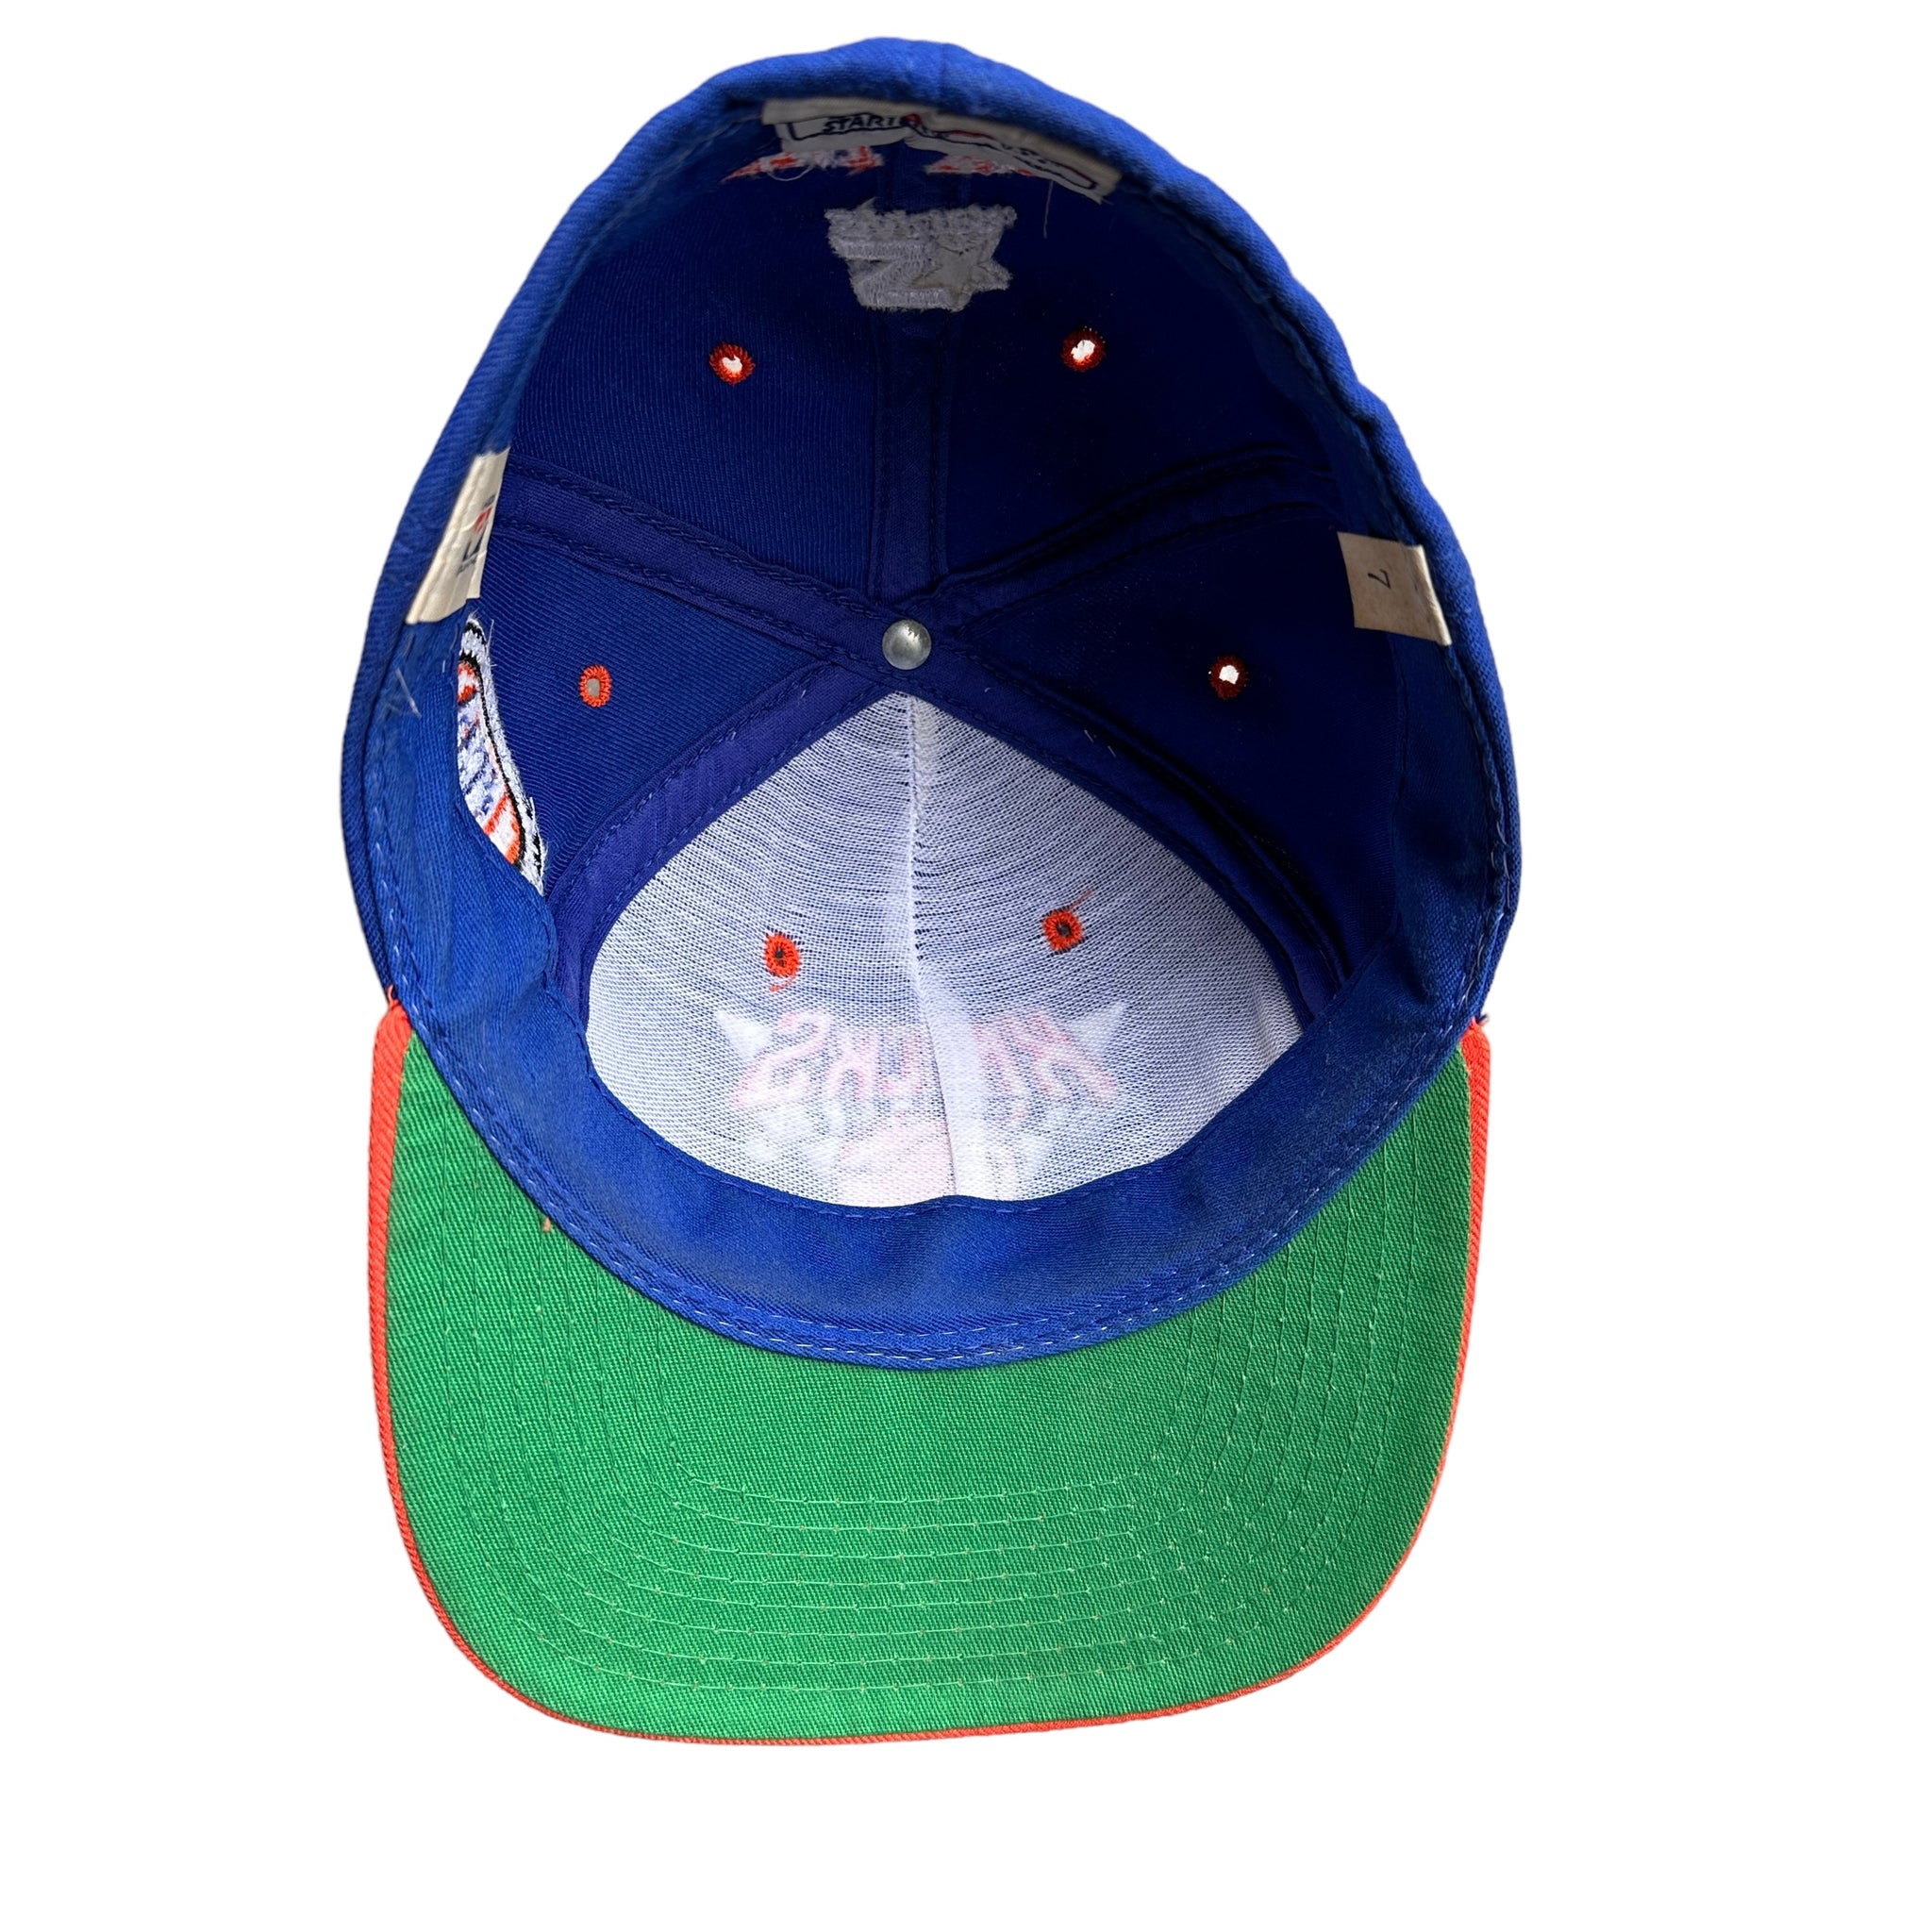 Made in usa🇺🇸 Knicks starter fitted hat sz7